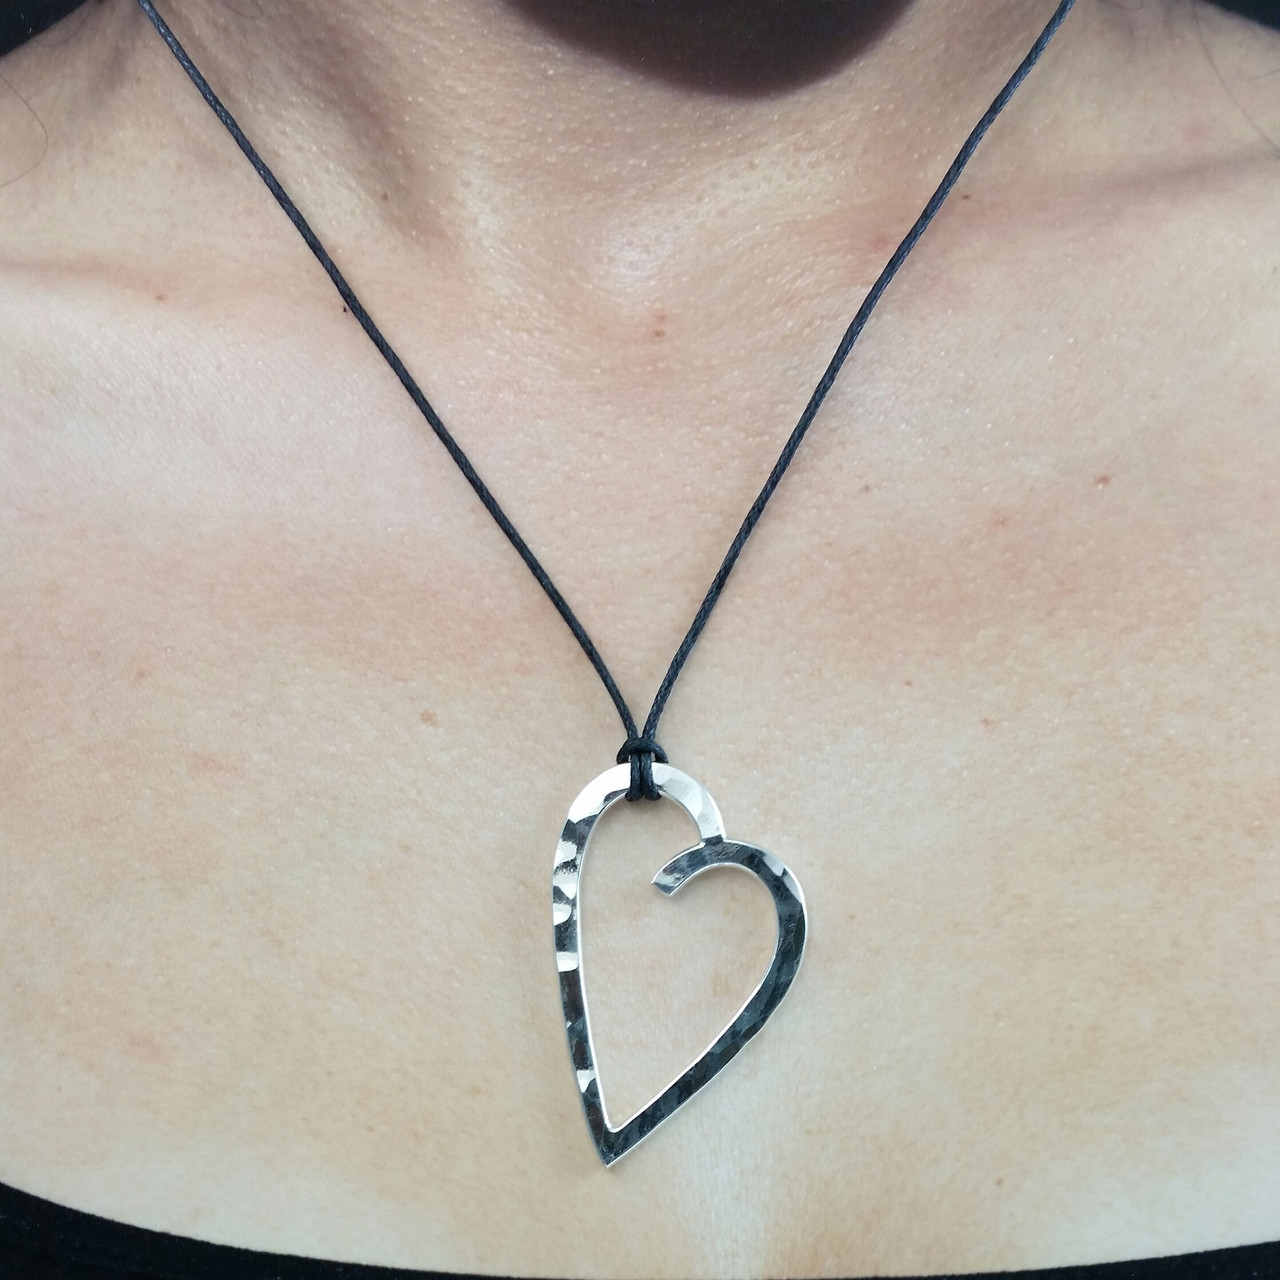 how to make a cord necklace for pendants